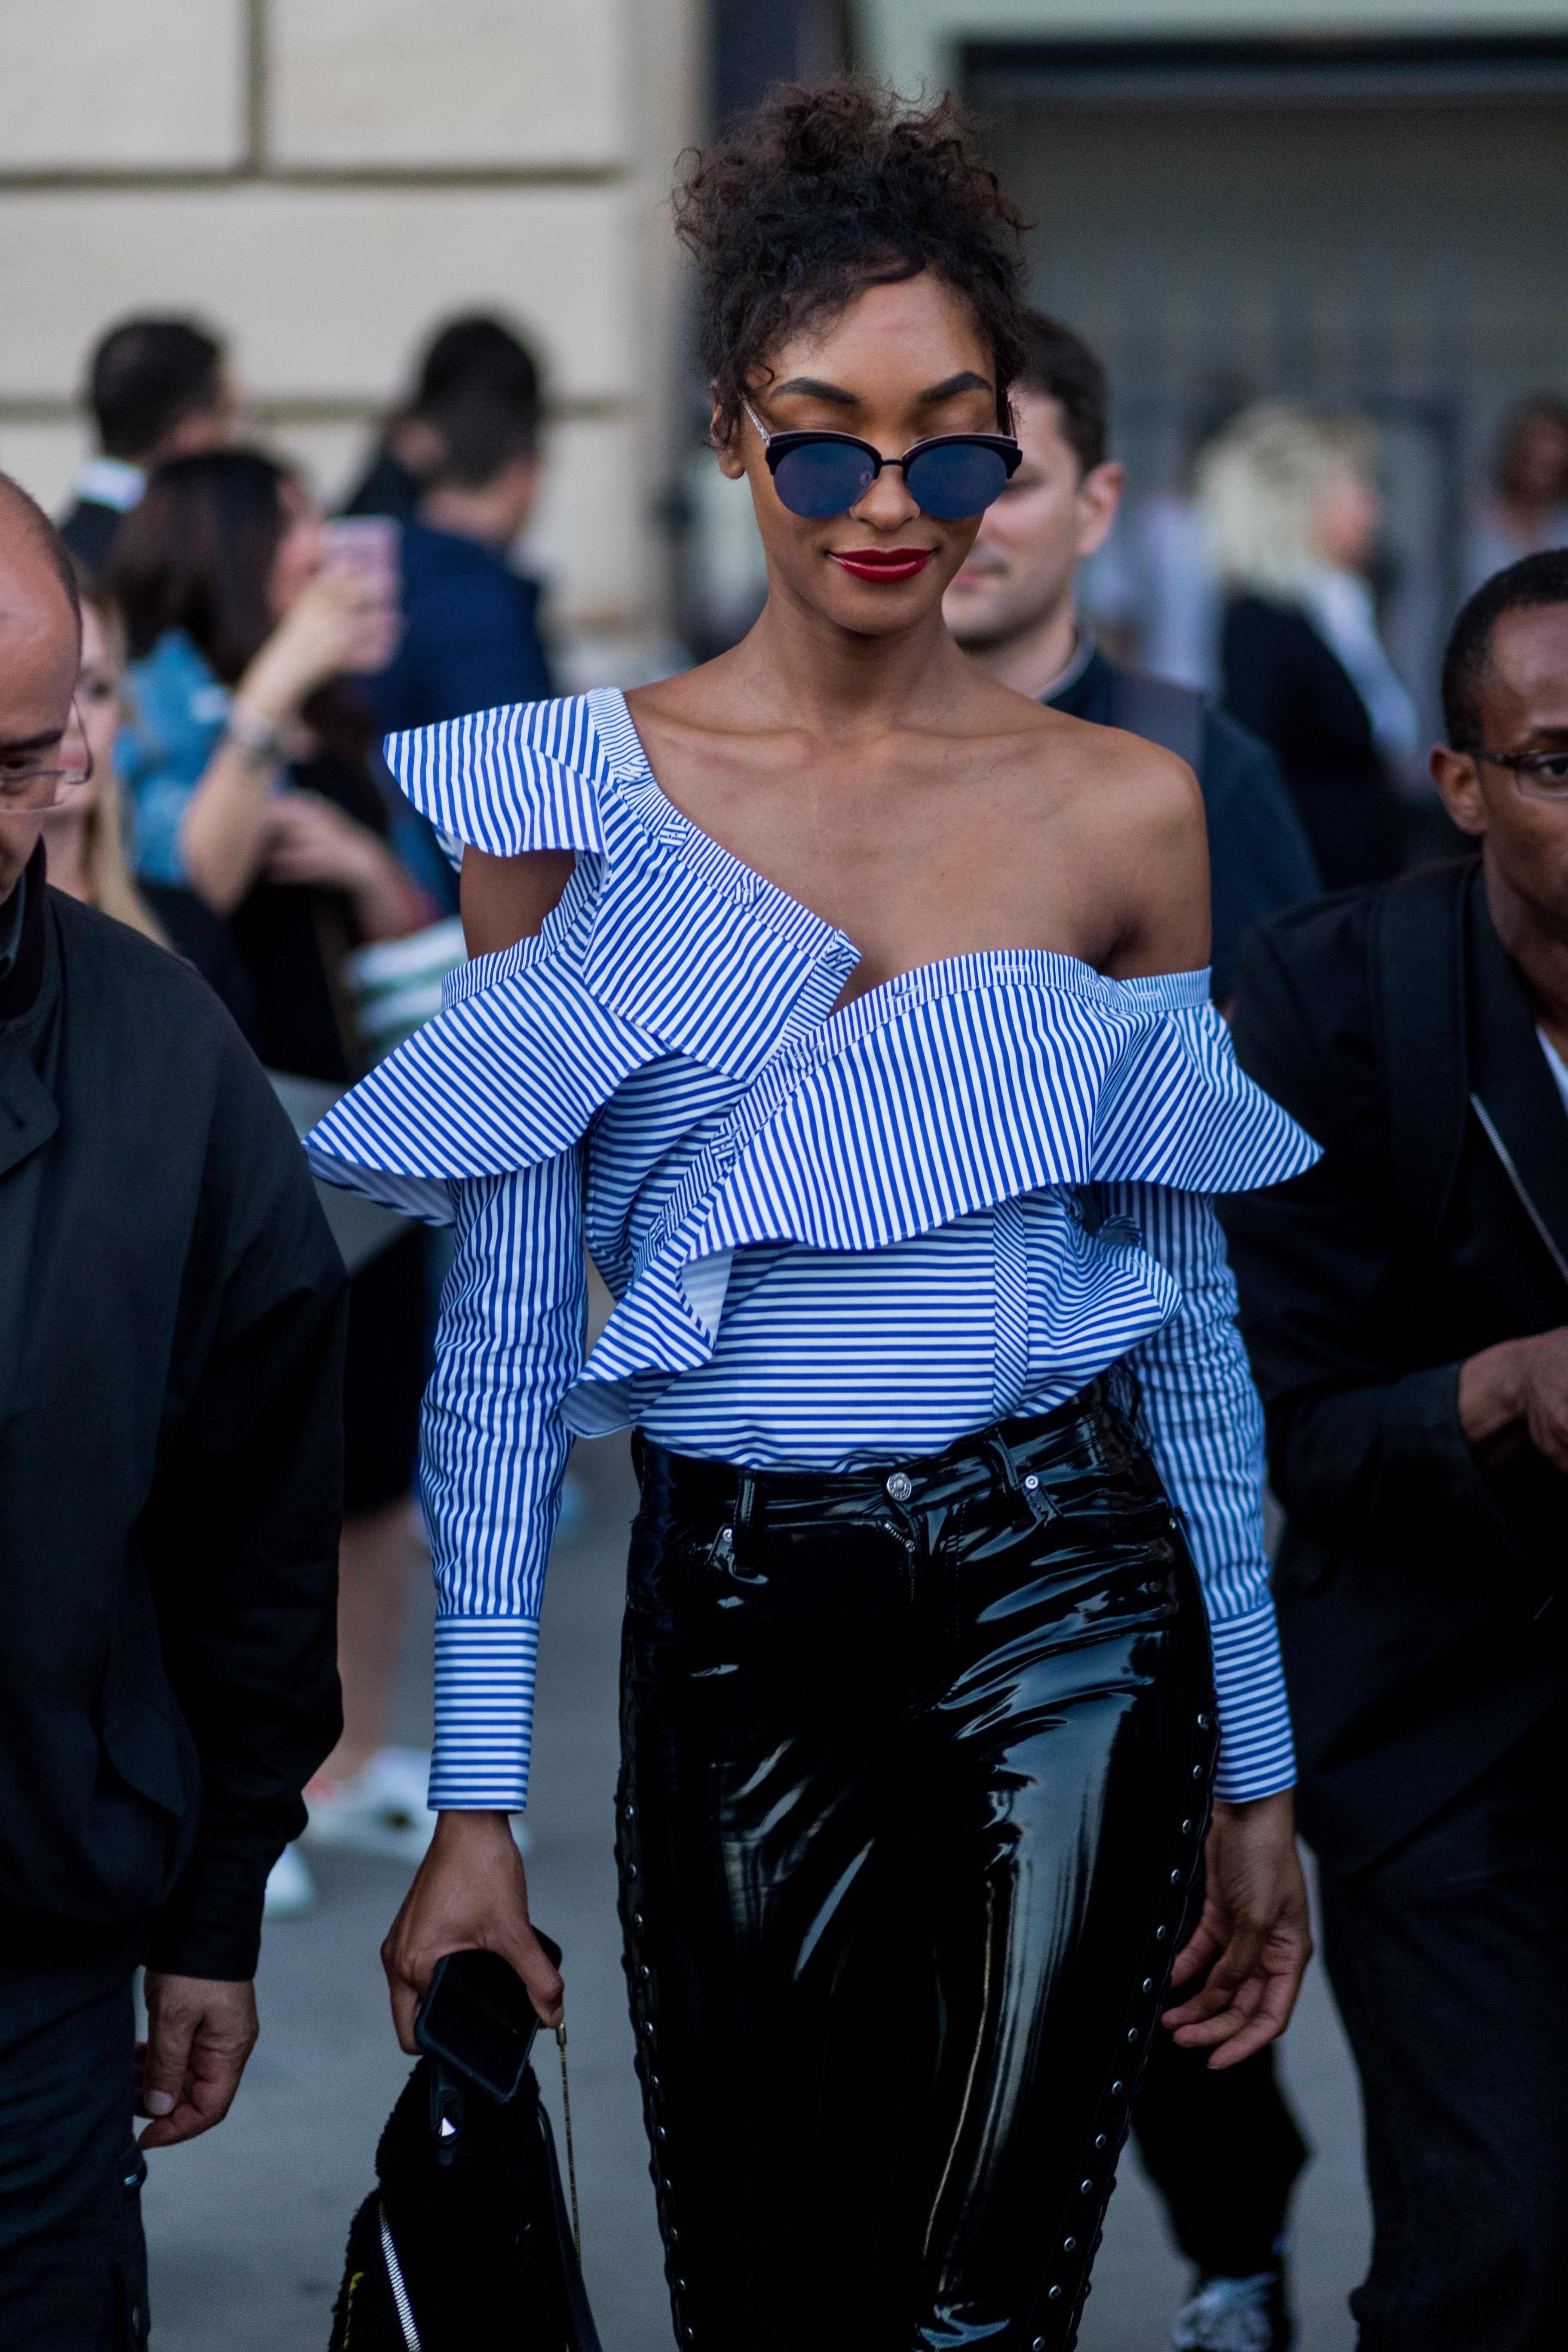 The Hottest Celeb Looks From Haute Couture Fashion Week
